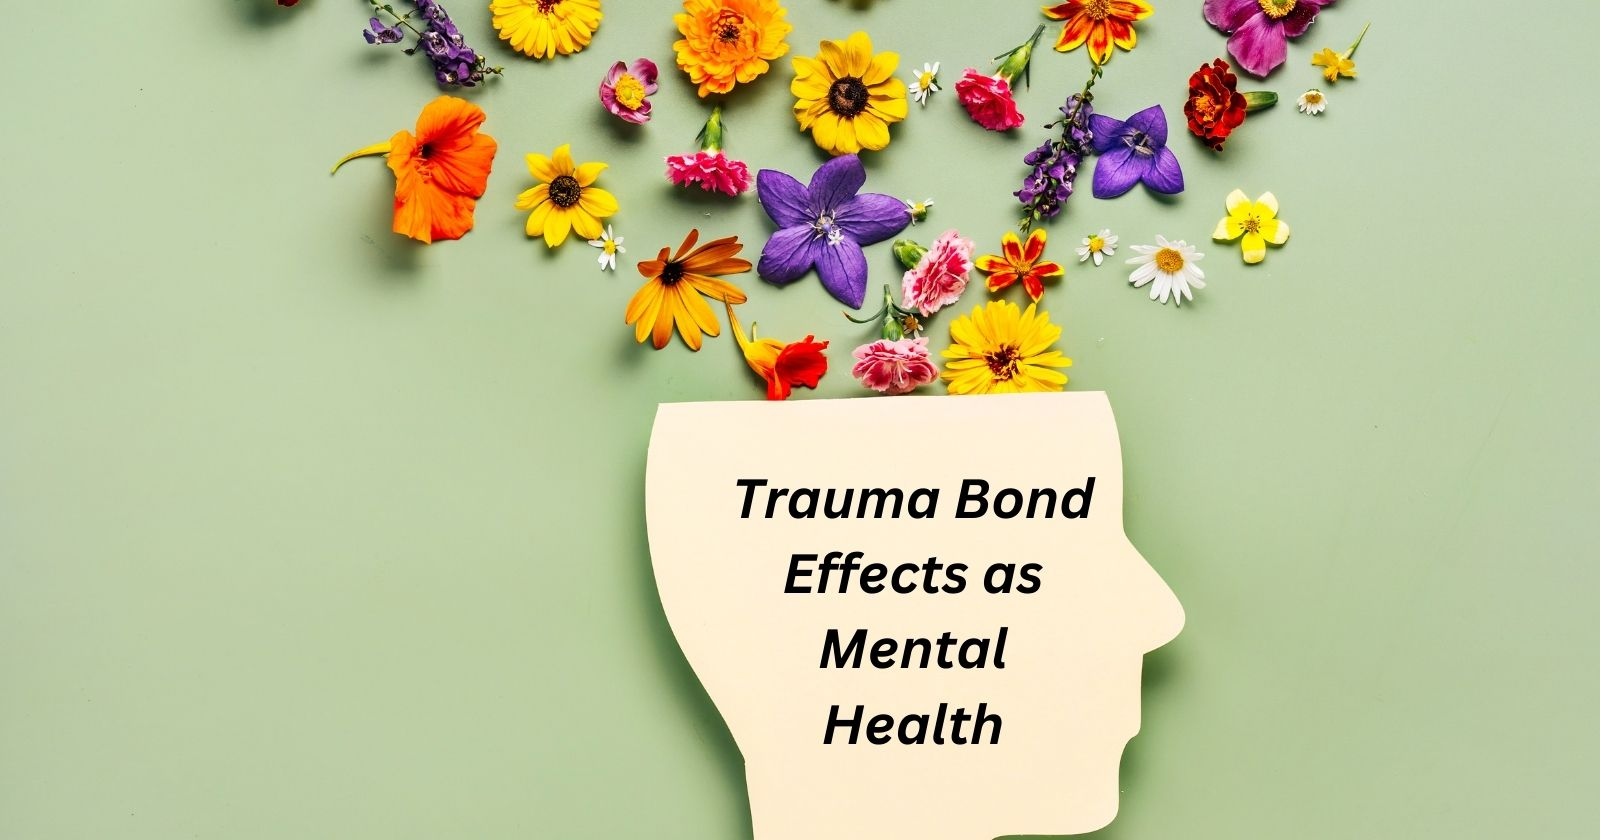 Role of mental health in Trauma Bonds

Face shape and flowers coming from the top side